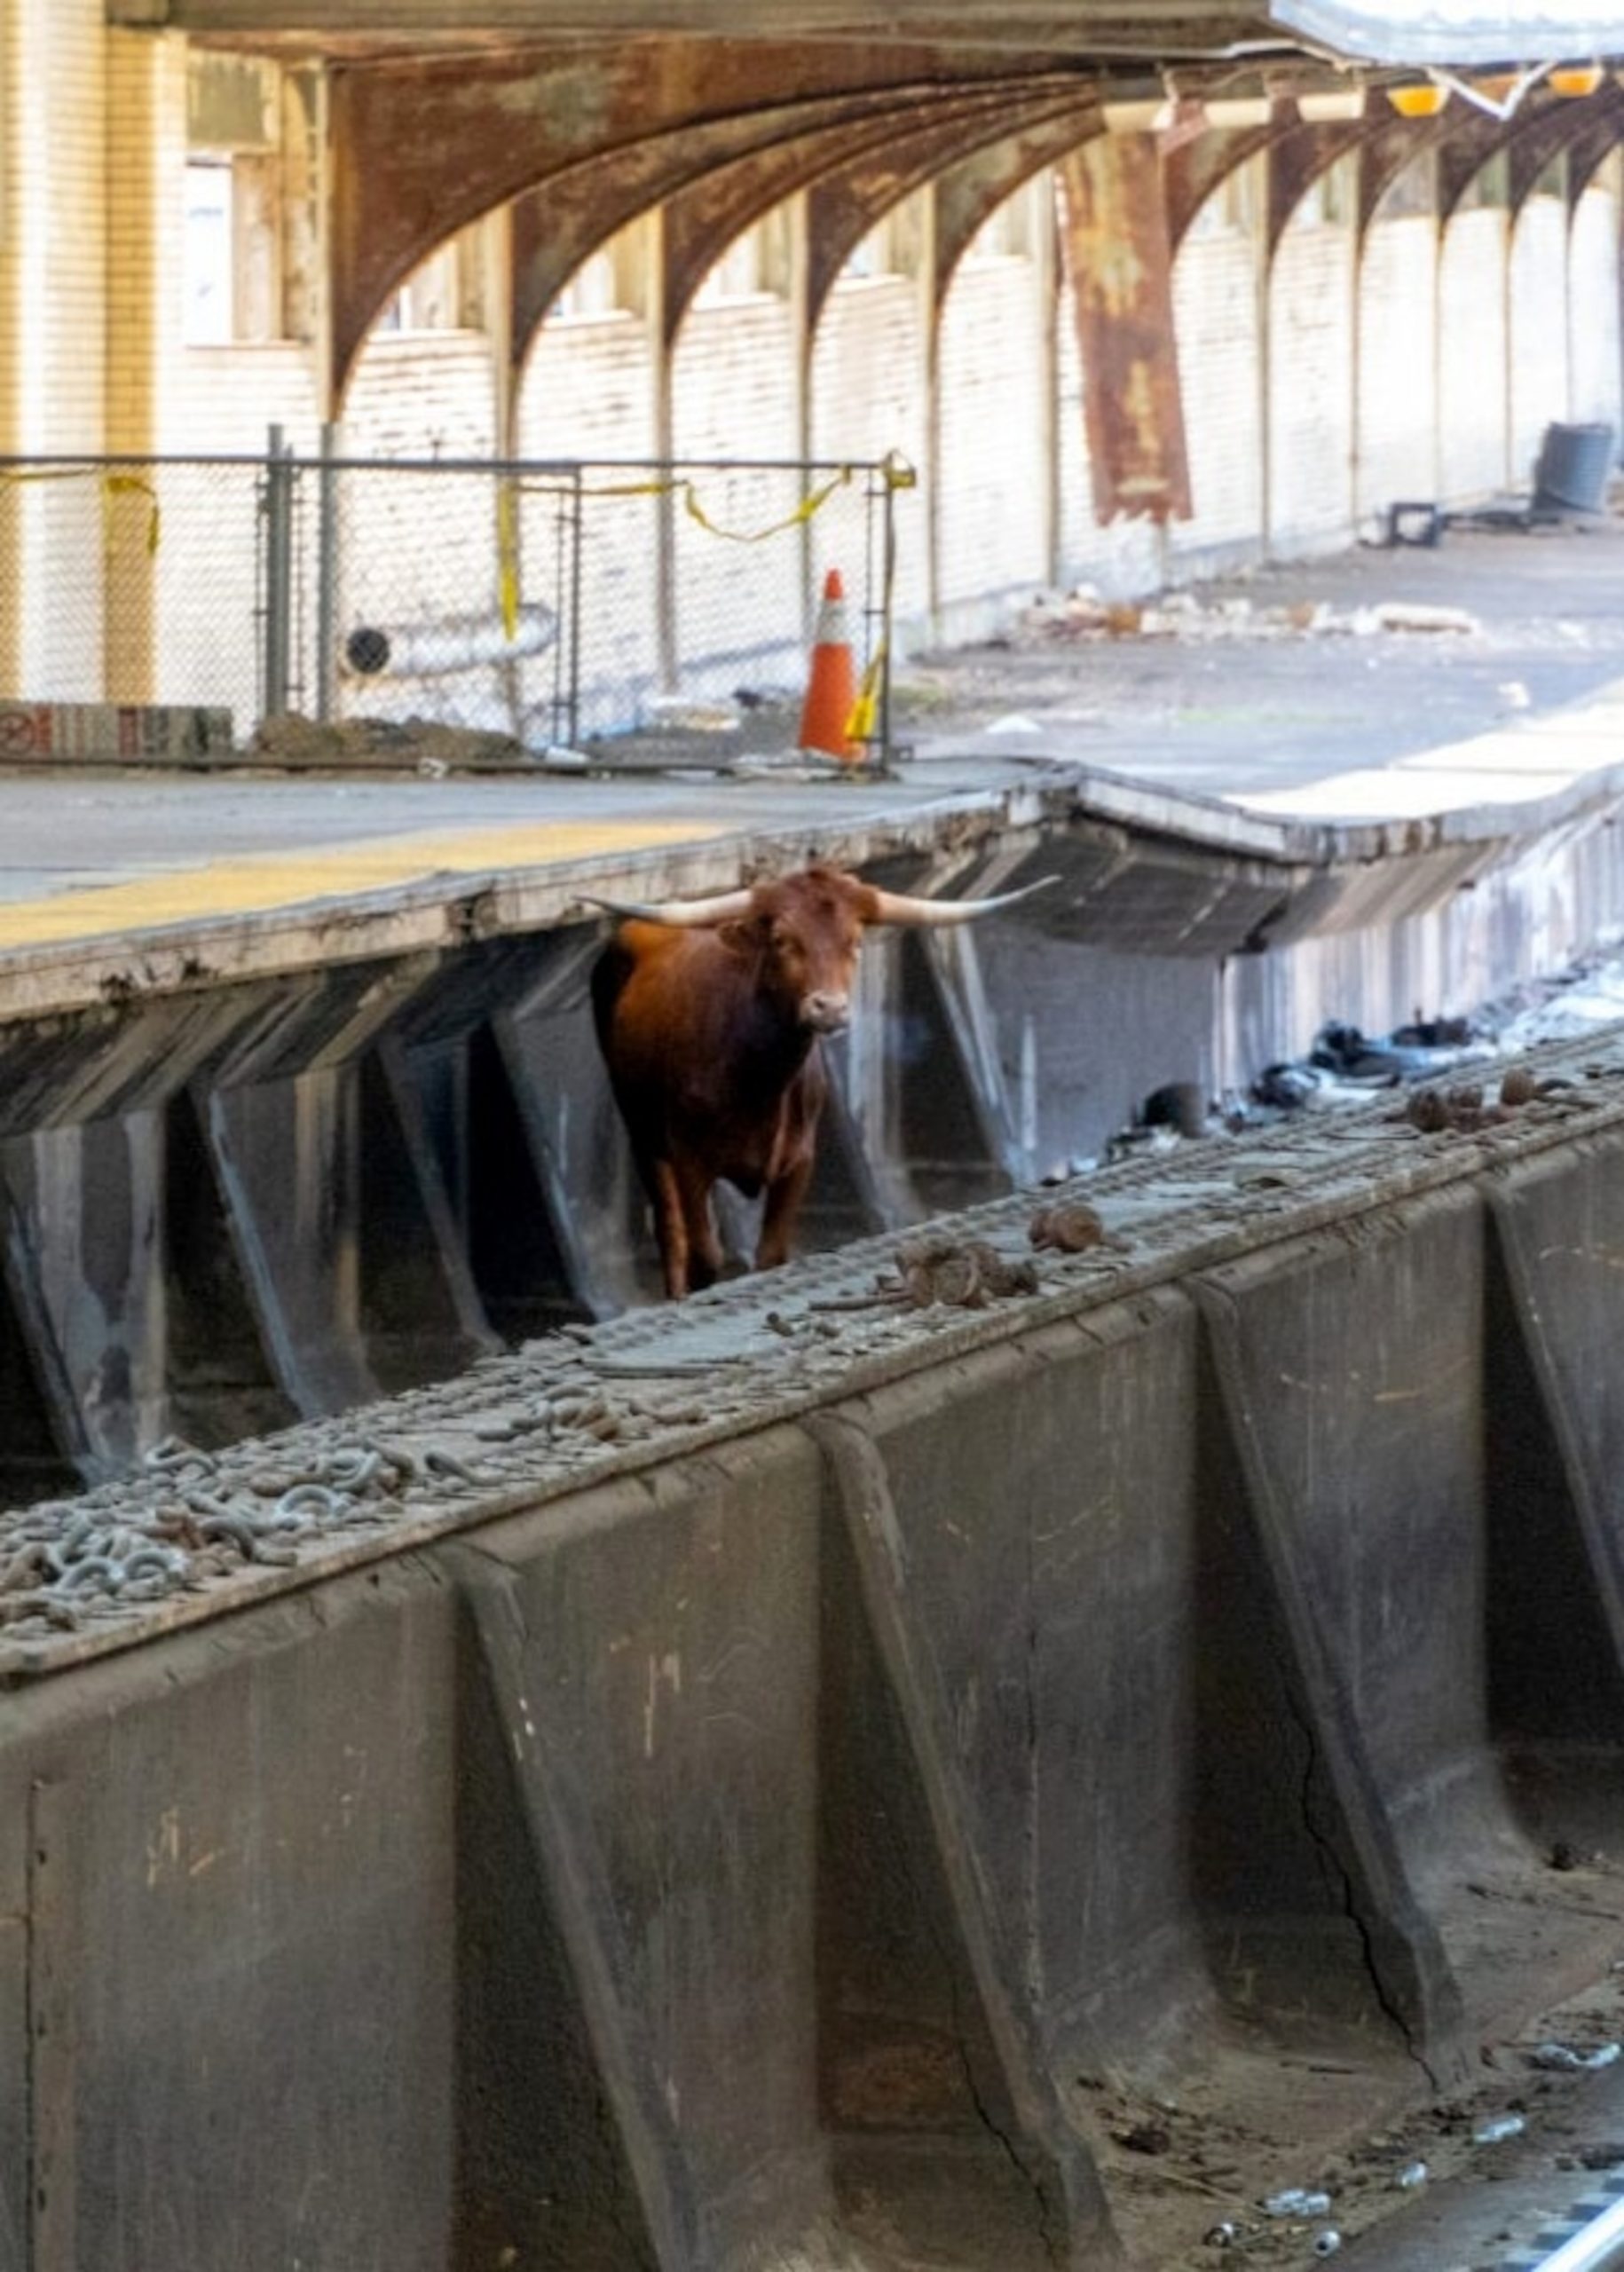 Bull Escapes and Causes Disruption at Newark Penn Station, Successfully Captured